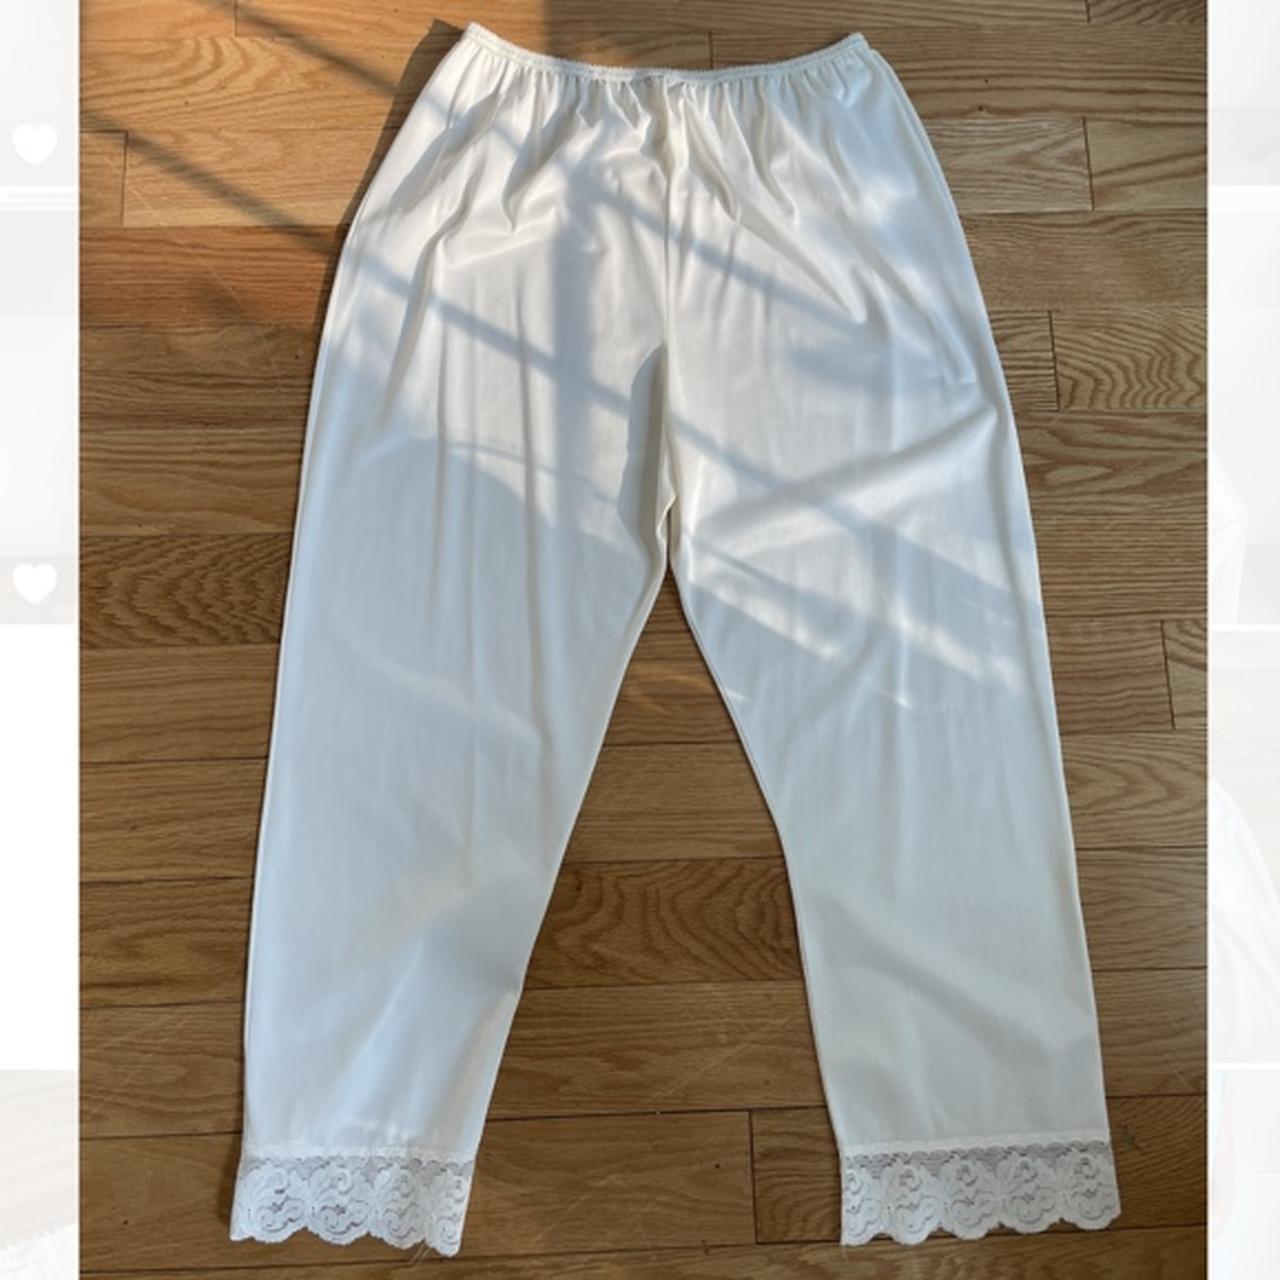 Adorable and comfortable 1960’s white pettipants by... - Depop